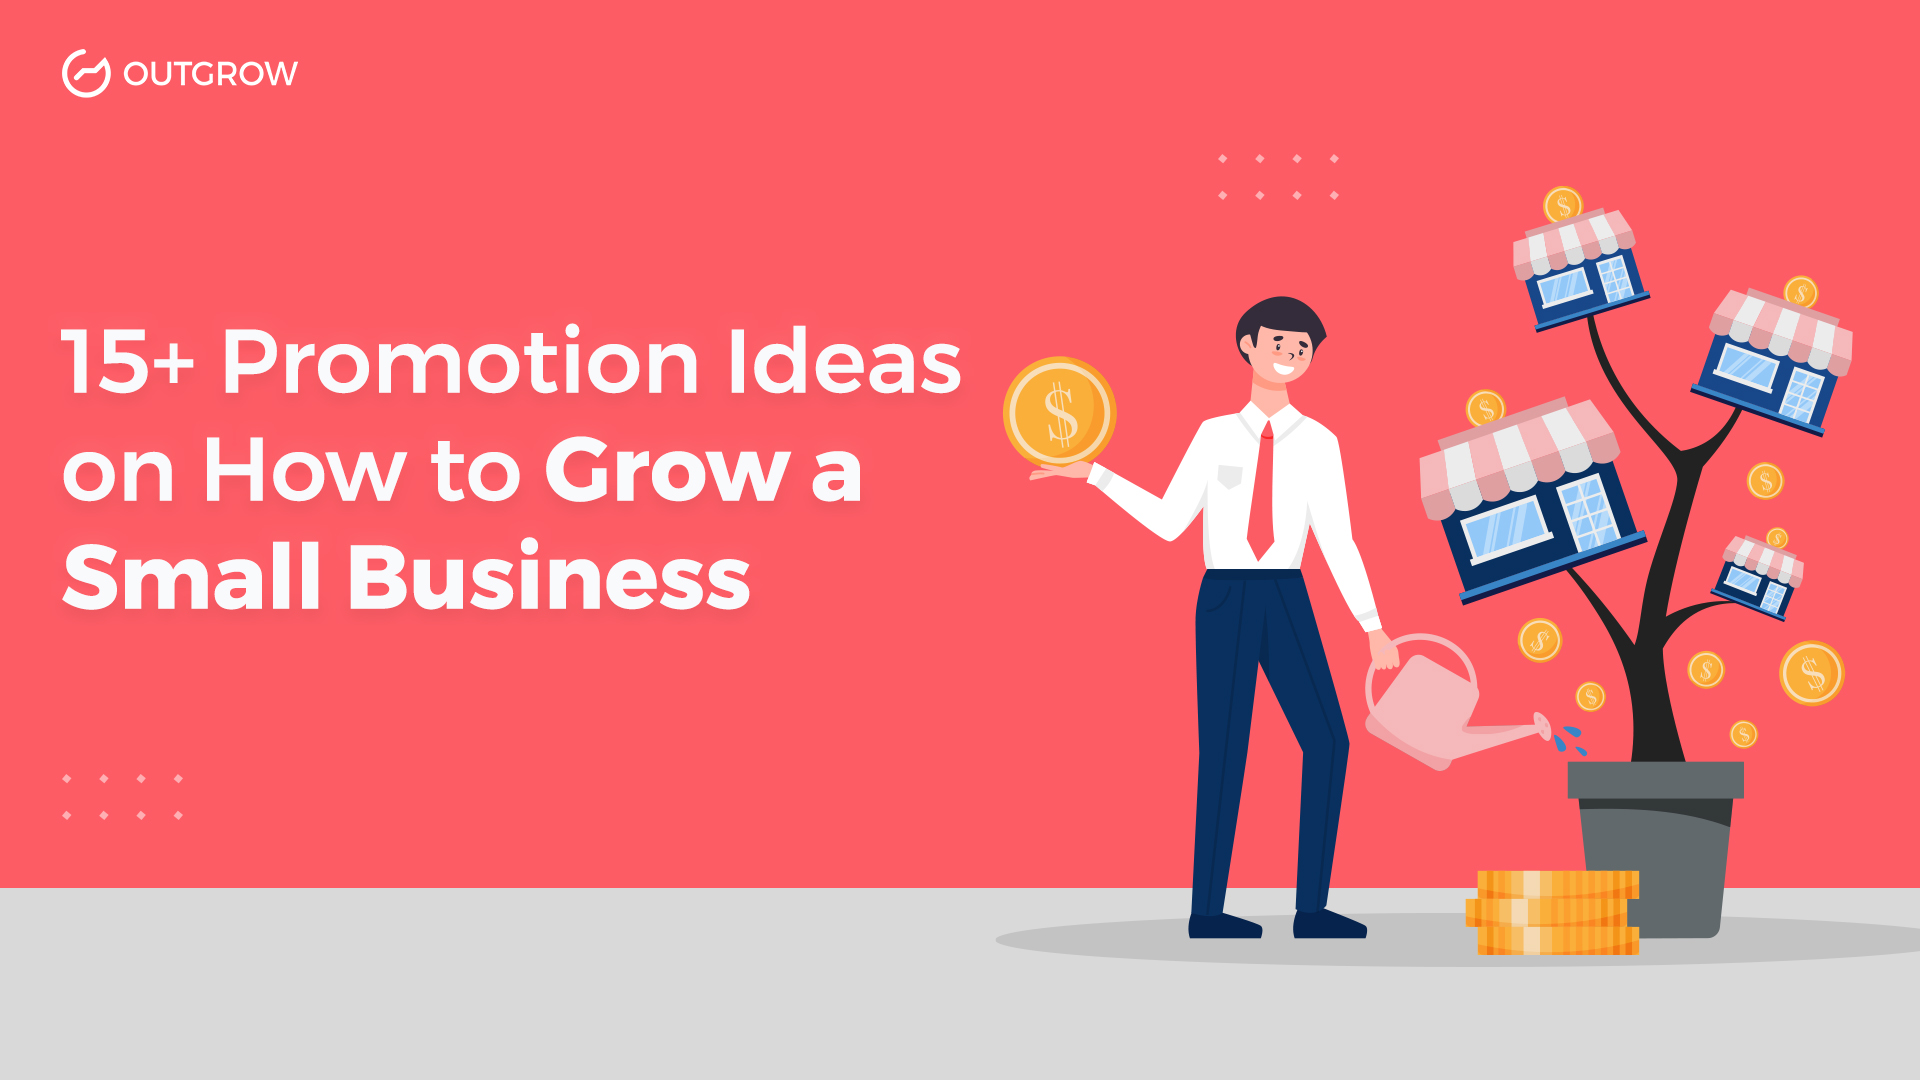 15+ Promotion Ideas on How to Grow a Small Business